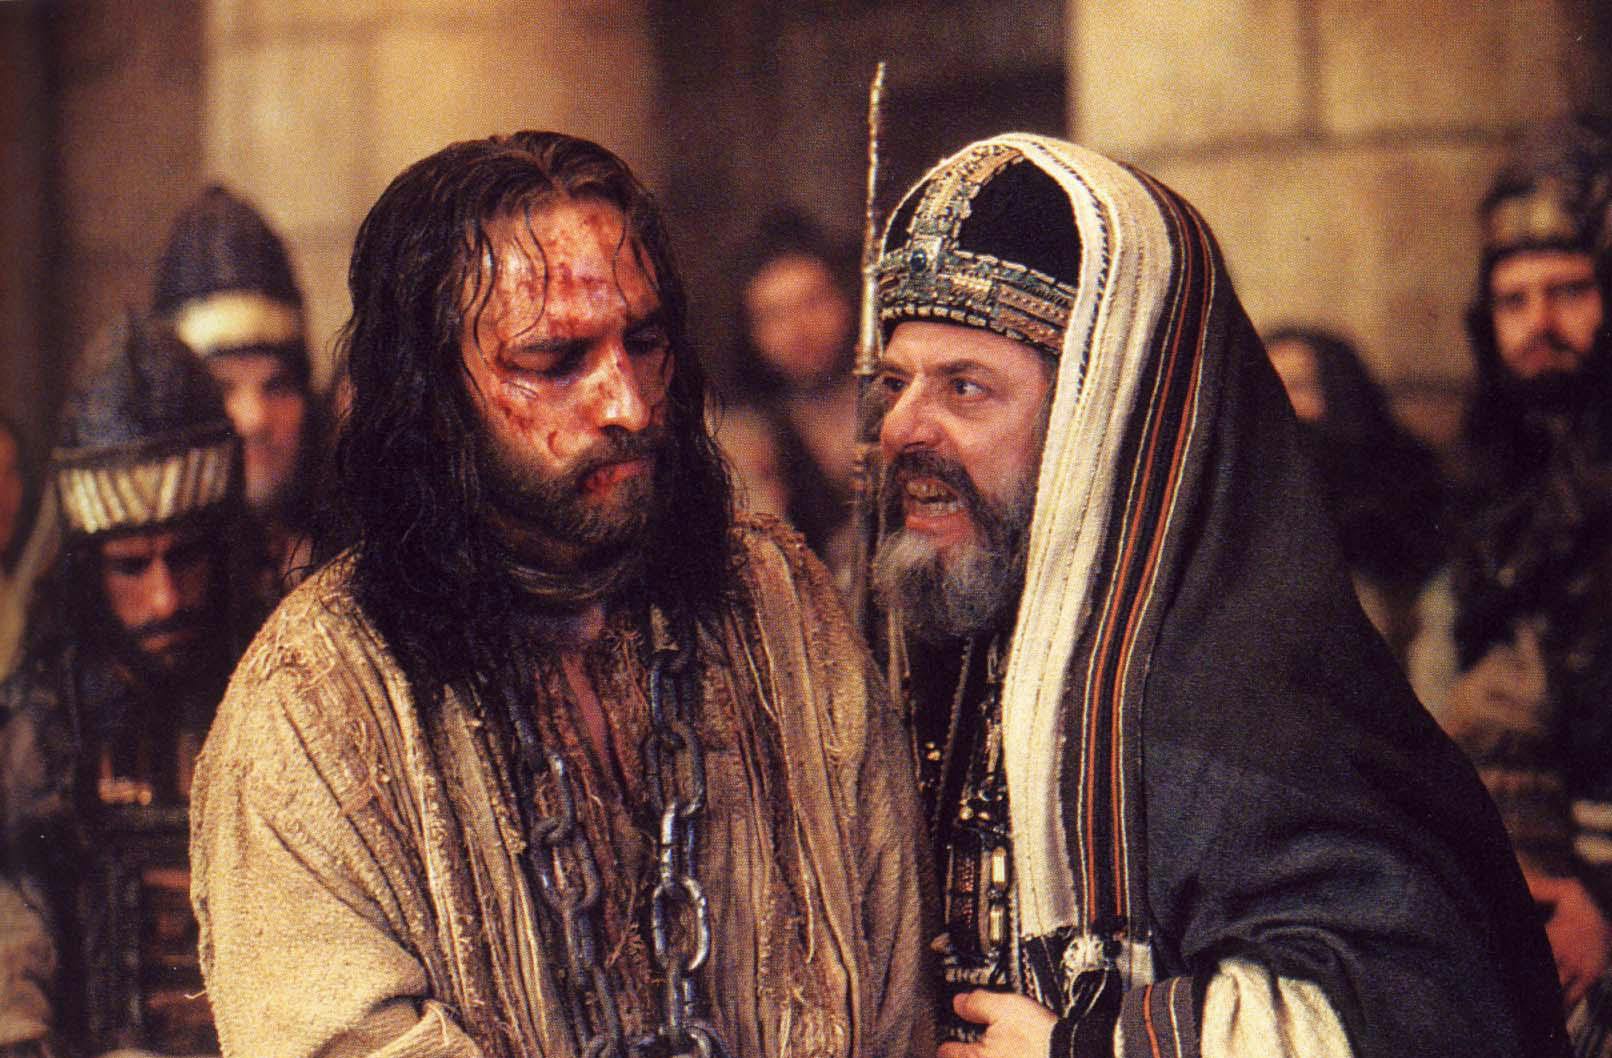 passion of christ free online with captions